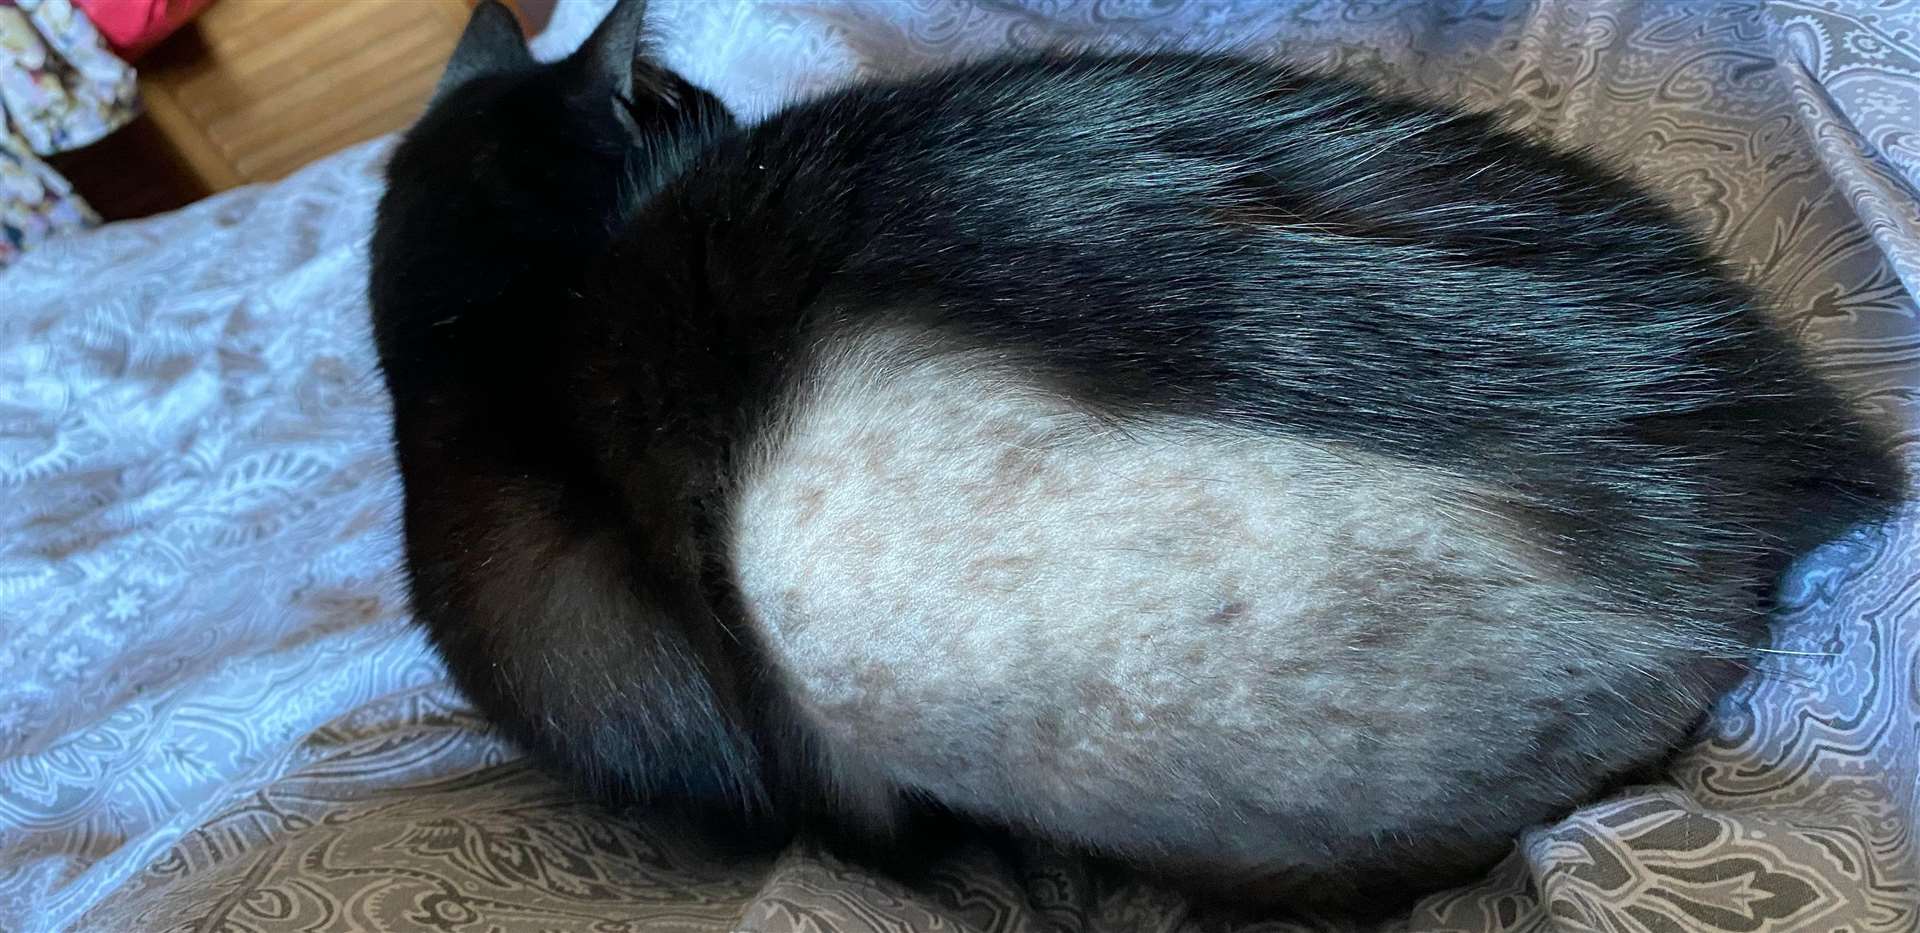 Cats are having their fur shaved in random attacks in Medway